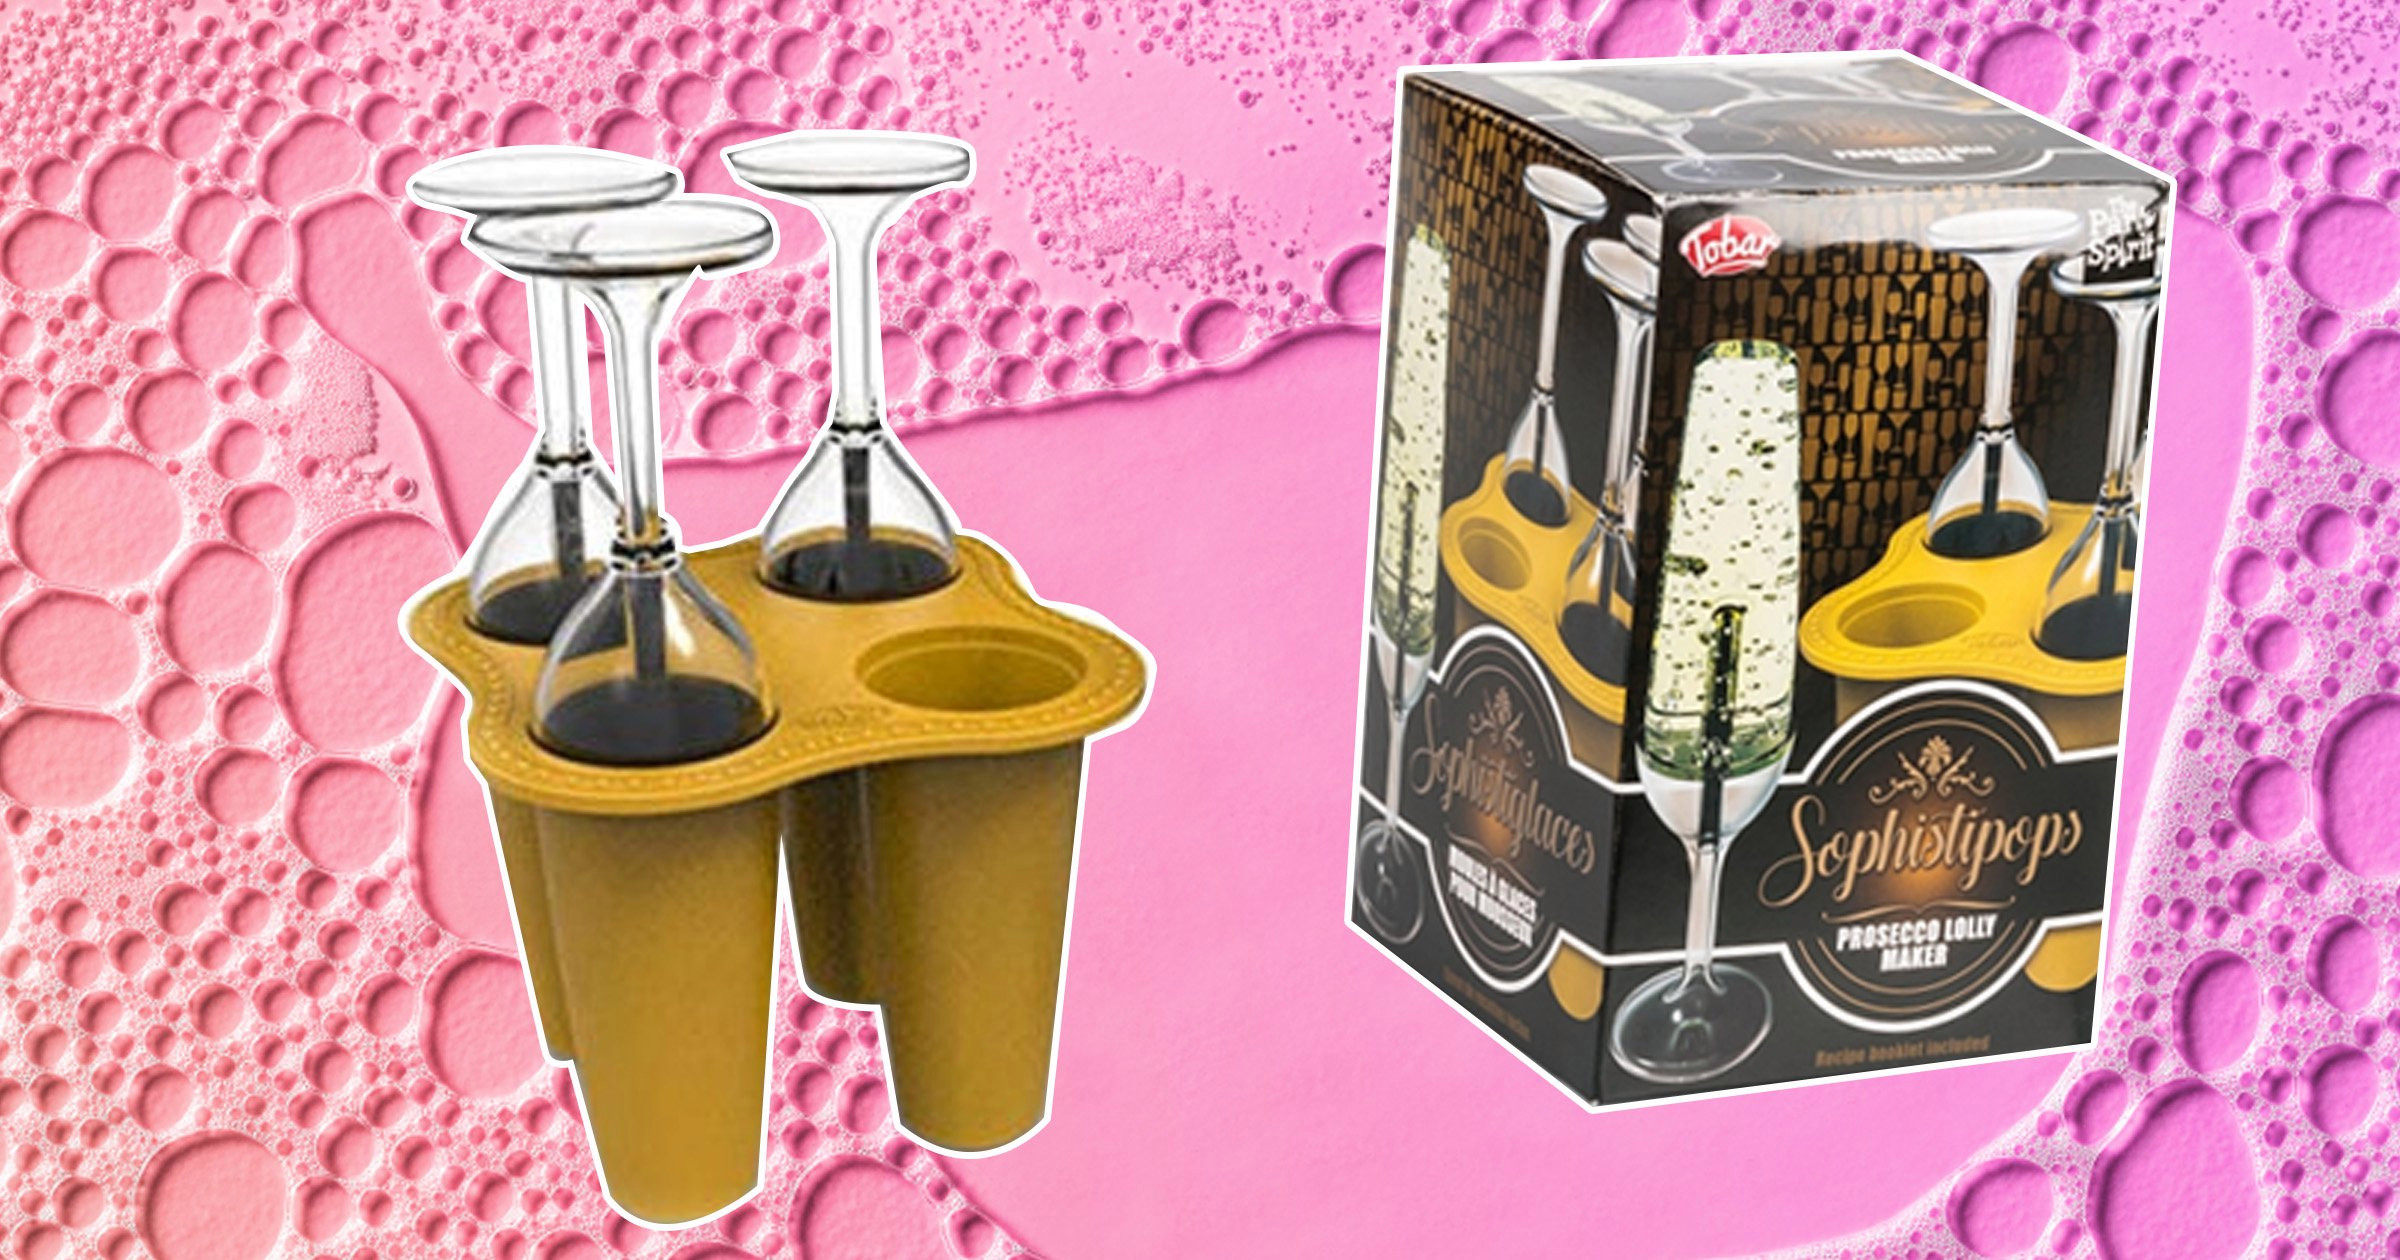 Prosecco popsicle moulds are a thing and you need them for summer